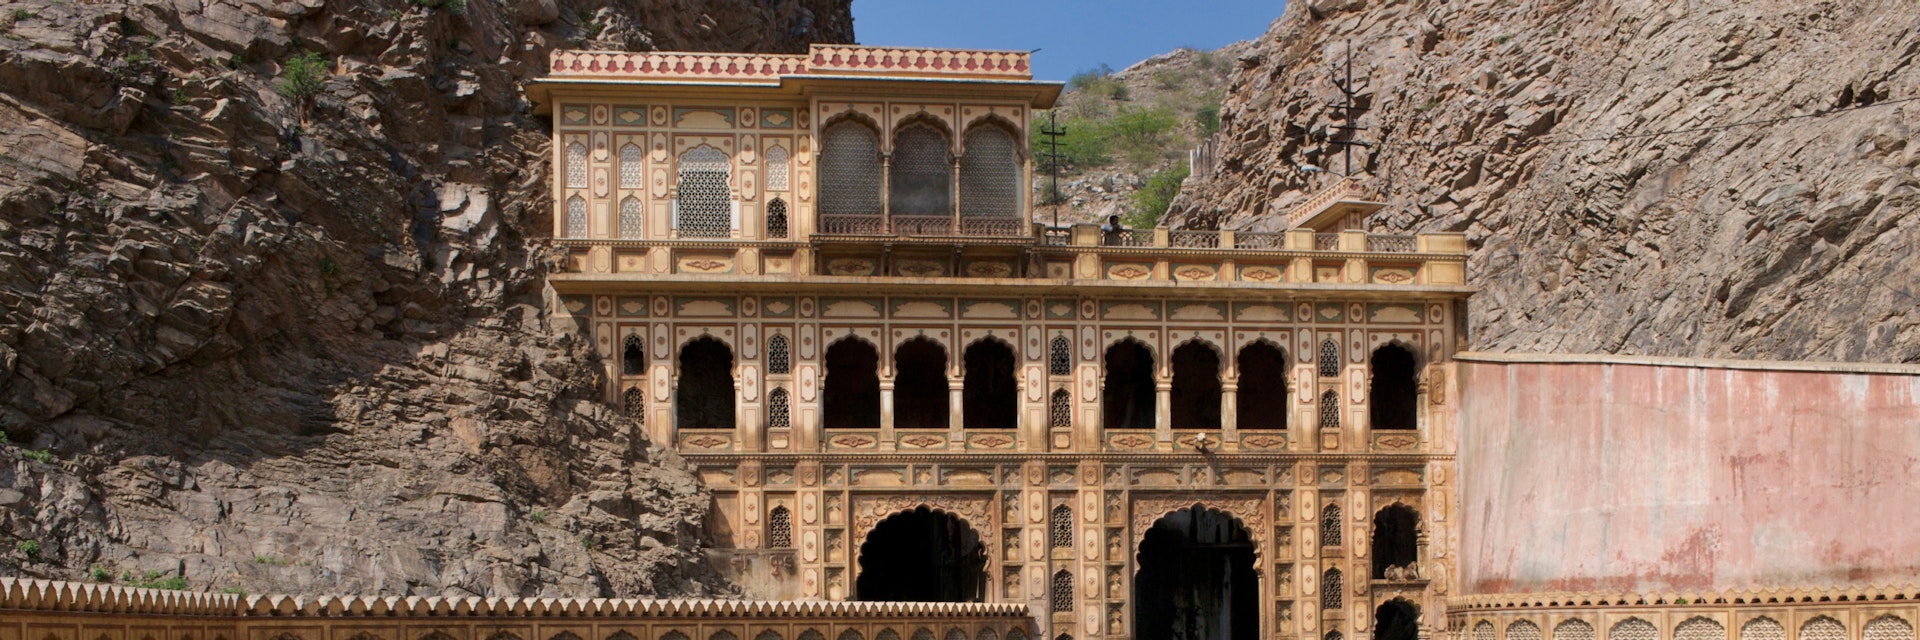 The Galta Temple (known as Monkey Temple) near Jaipur, Rajasthan, India